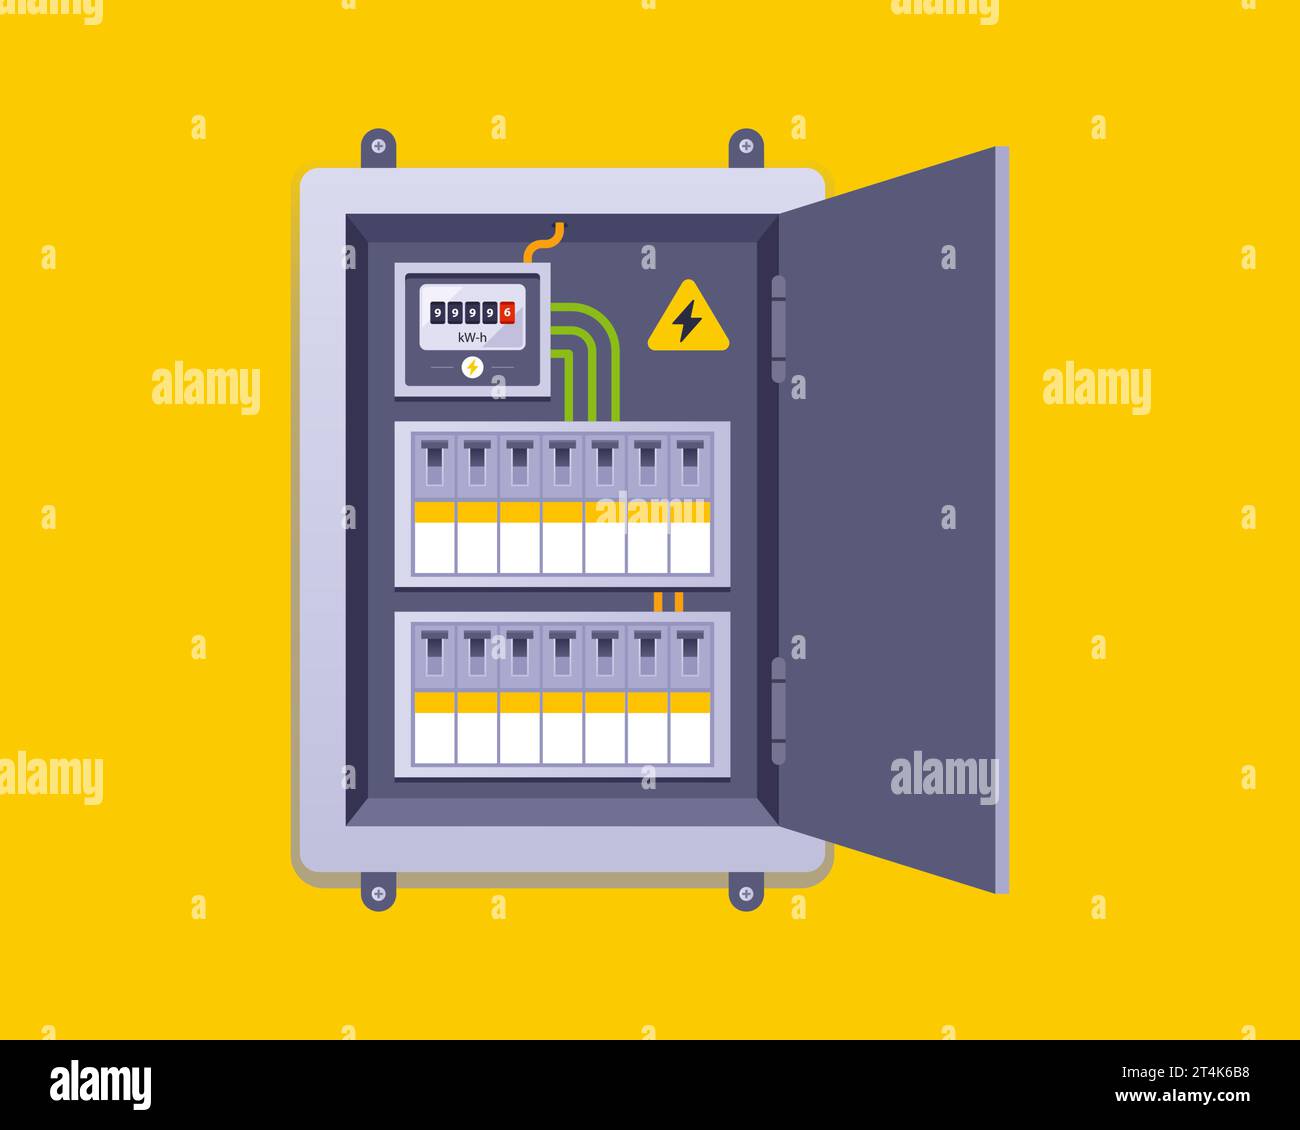 electrical panel for turning lights on and off. flat vector illustration. Stock Vector